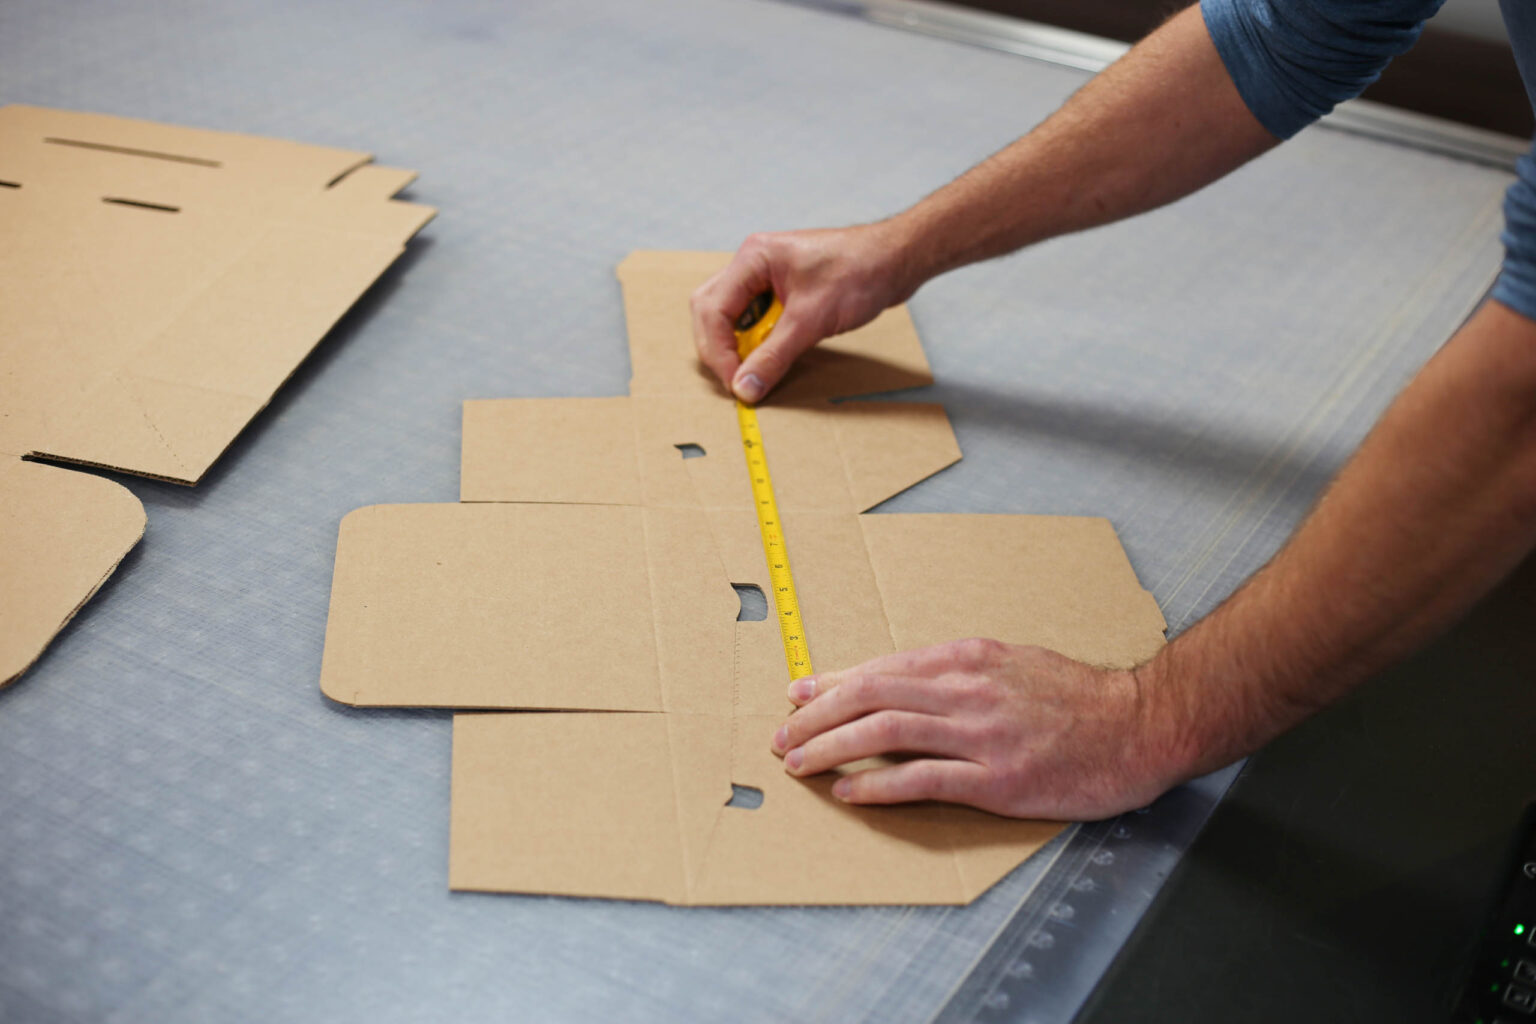 A man measuring cardboard boxes with a measuring tape.